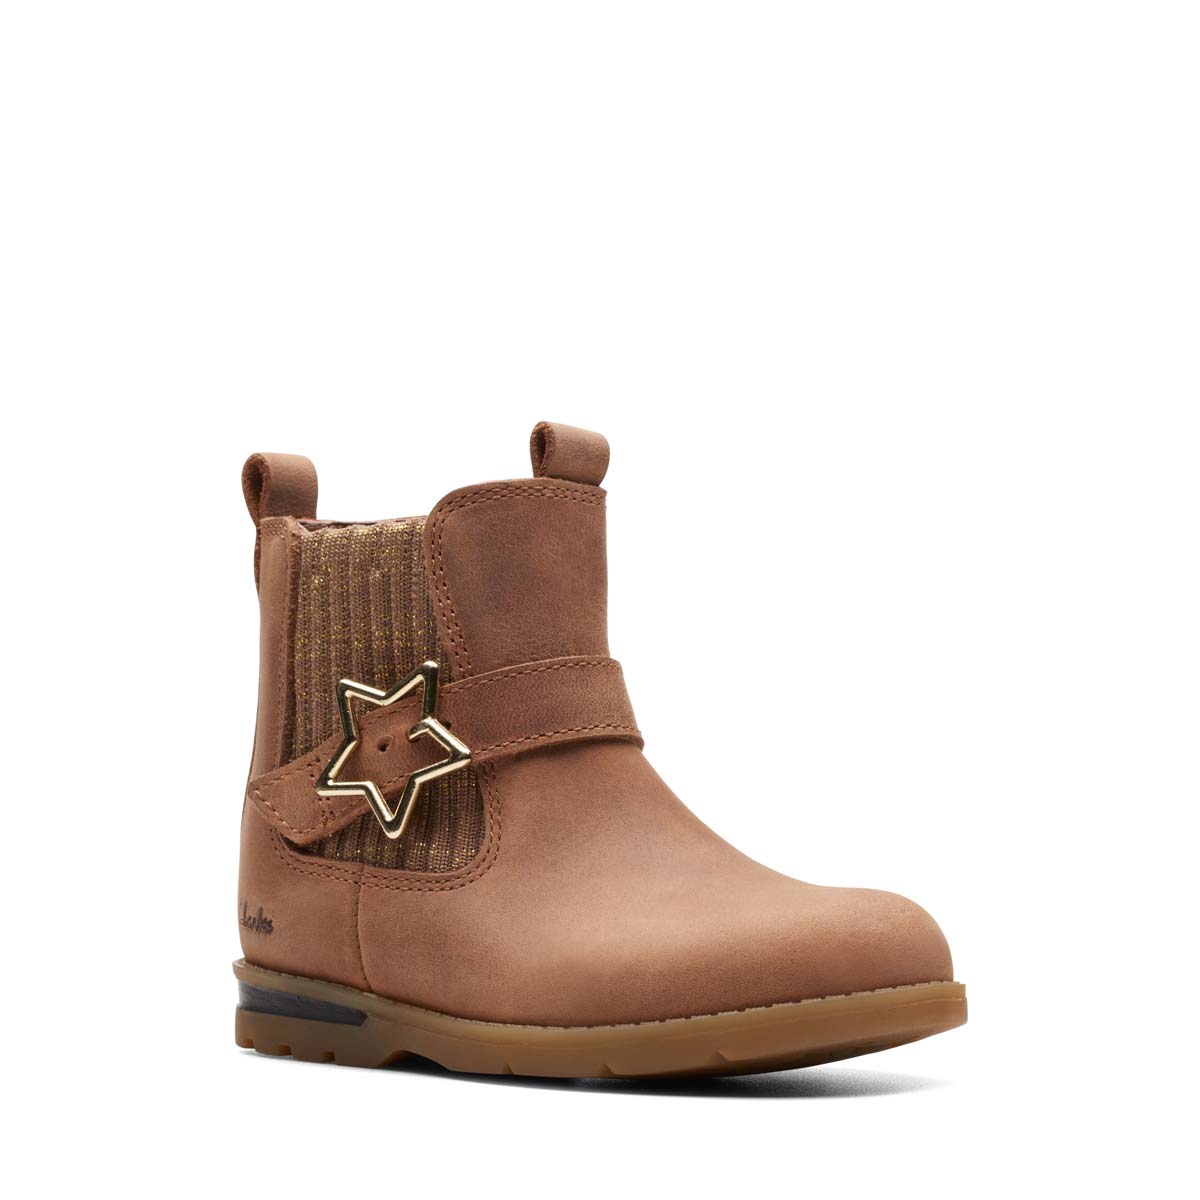 Clarks Dabi Star T Tan Leather  Kids Toddler Girls Boots 748946F In Size 4.5 In Plain Tan Leather F Width Fitting Regular Fit For kids